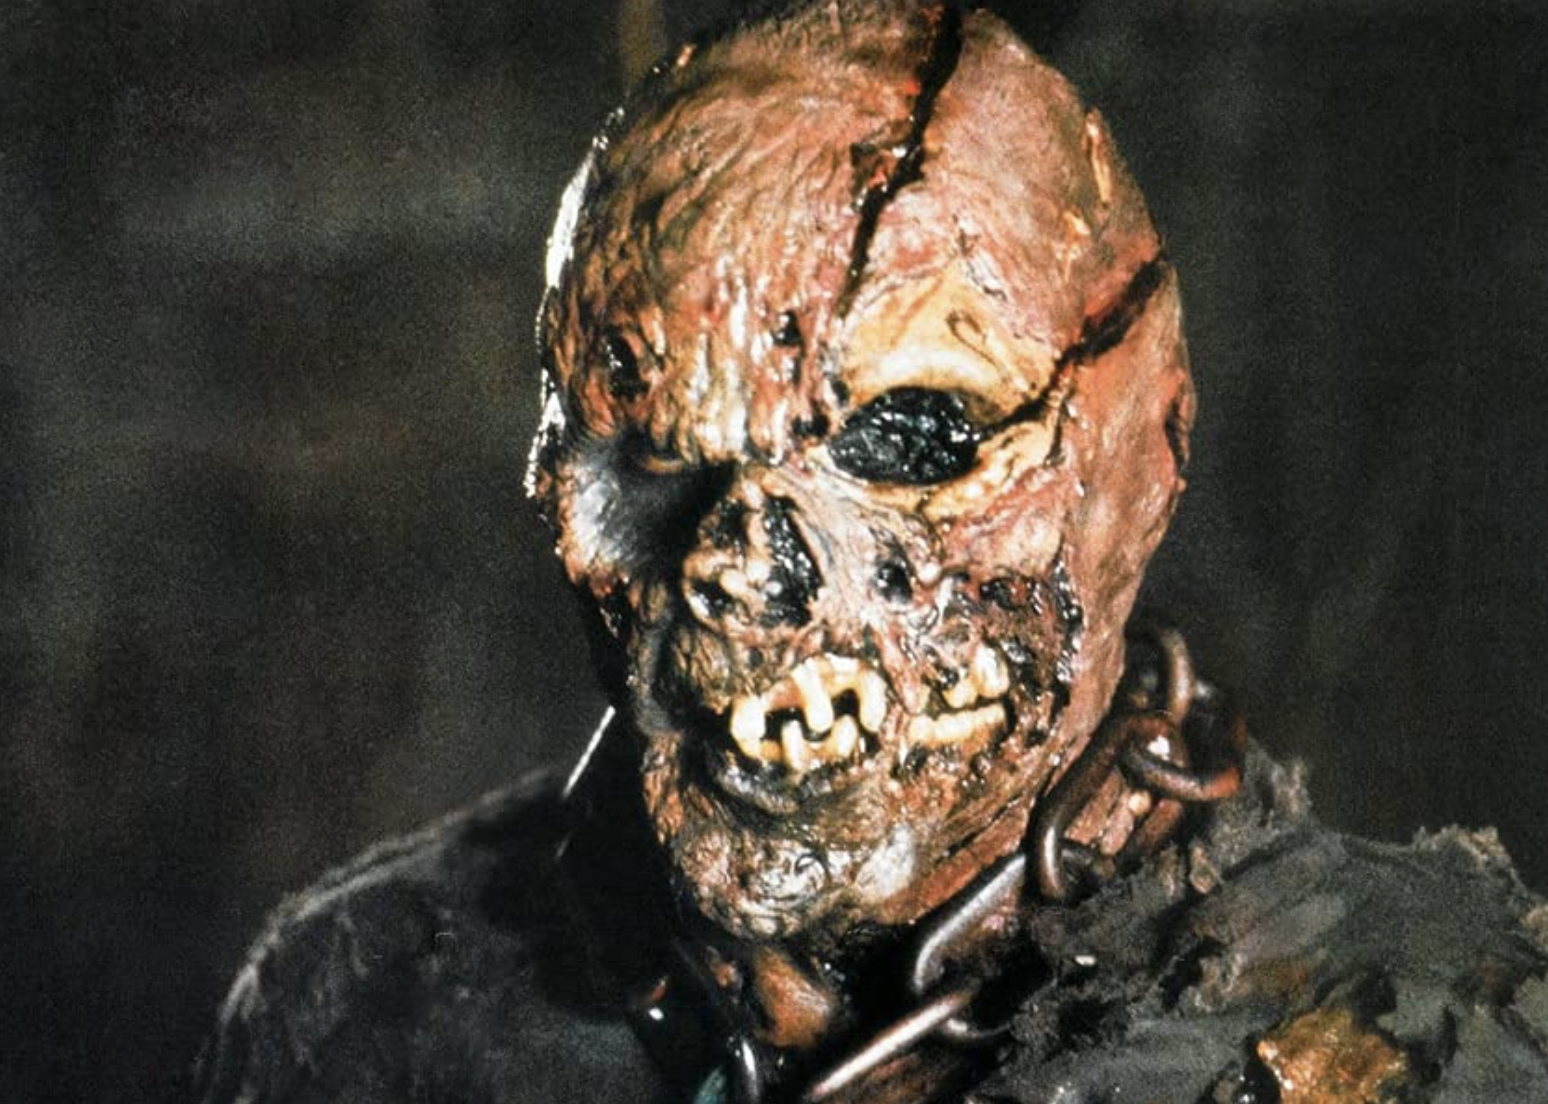 Kane Hodder in "Friday the 13th Part VII: The New Blood"